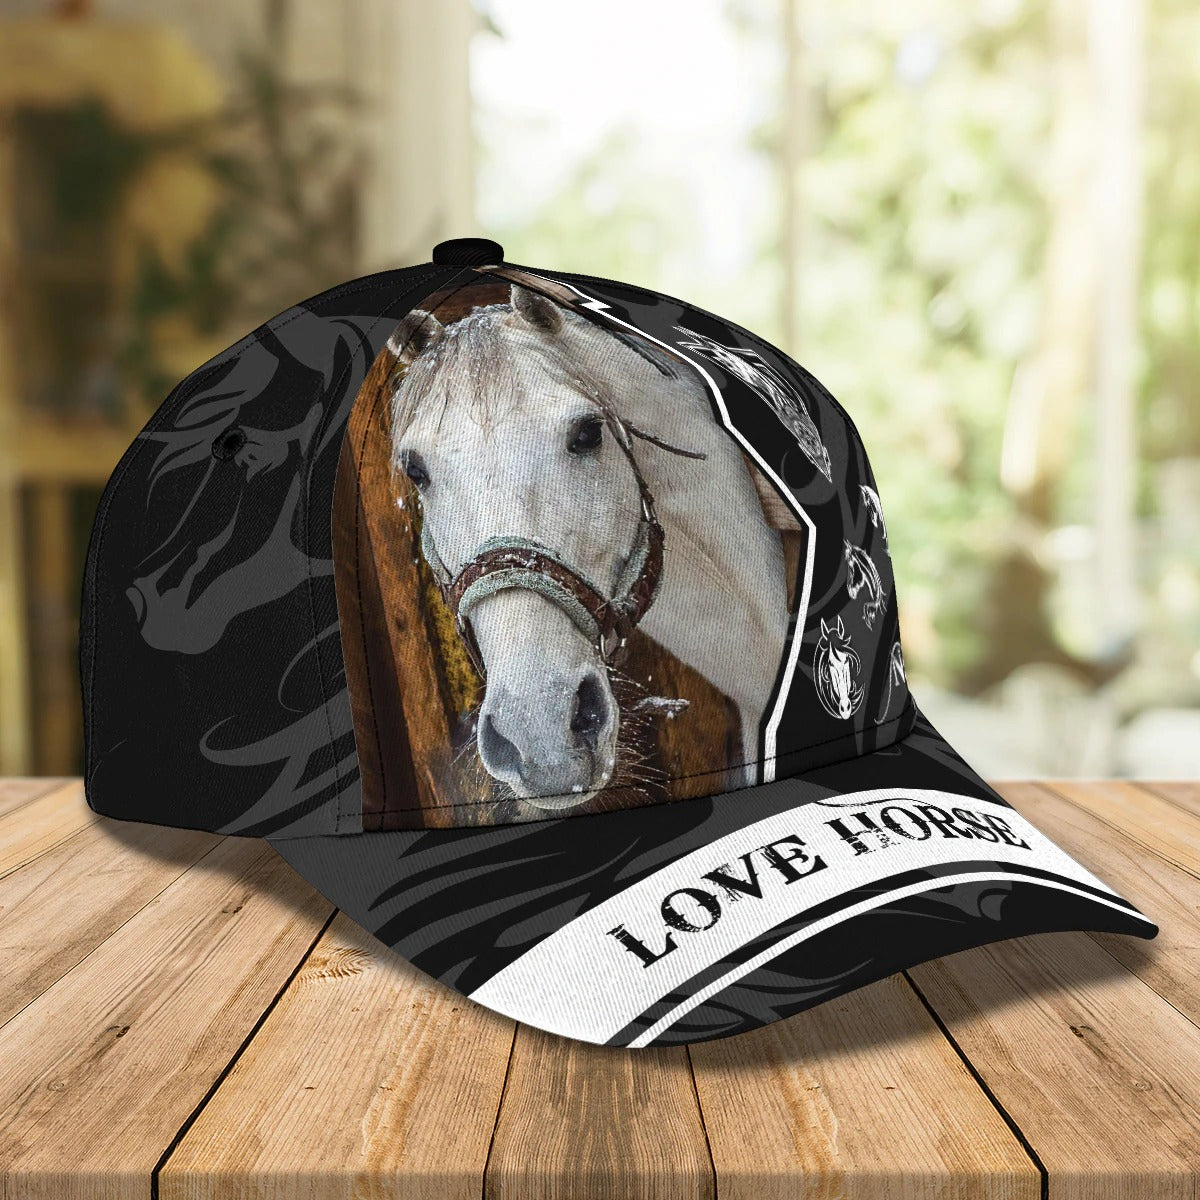 Custom With Name Baseball Full Print Horse Cap For Men And Woman/ Horse Woman Cap Hat/ Horse Lover Gift